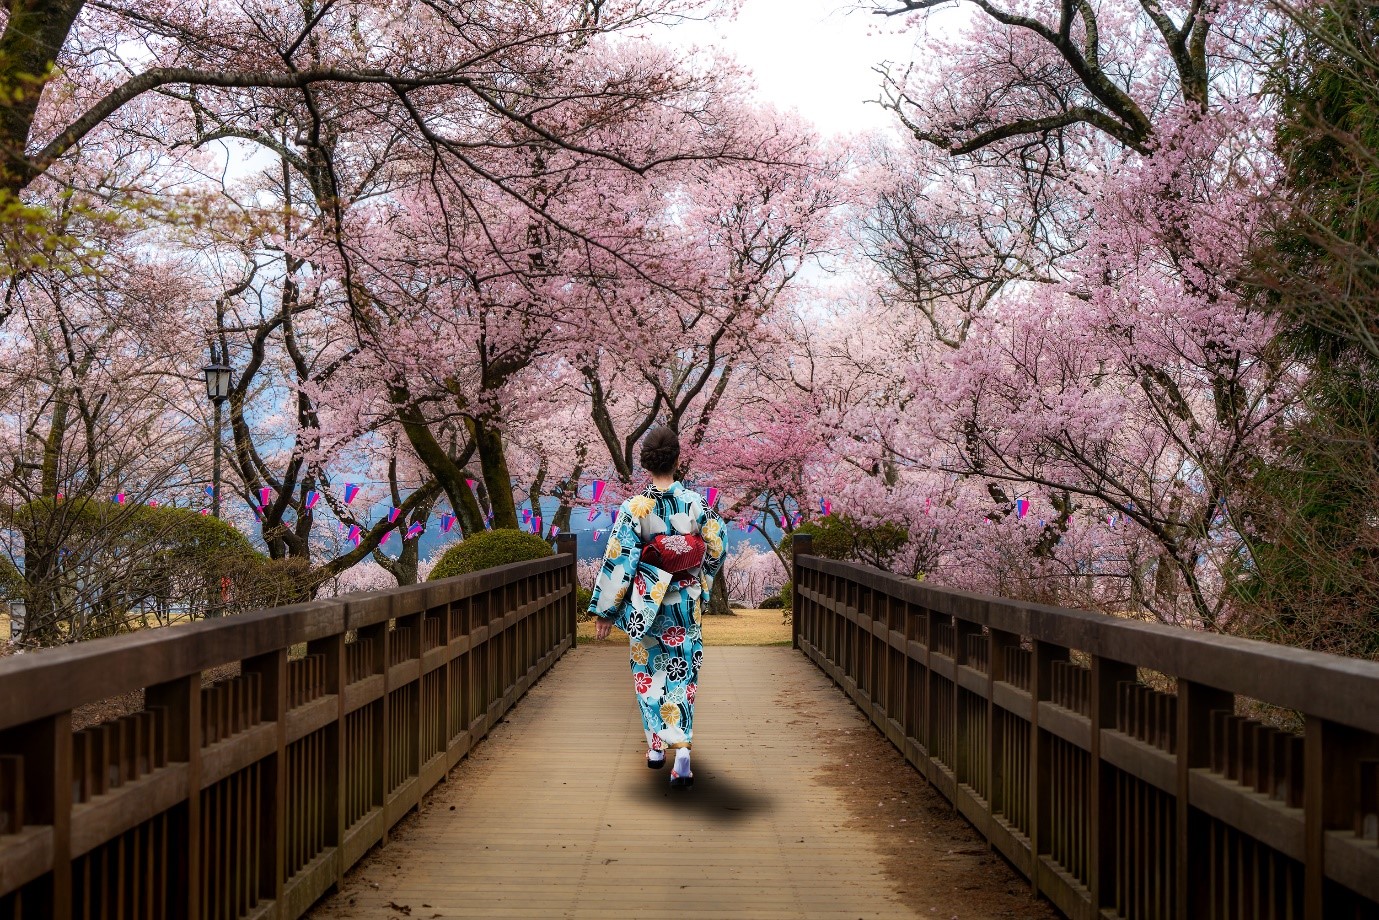 A woman in traditional Japanese garb walks a bridge under cherry blossom trees.